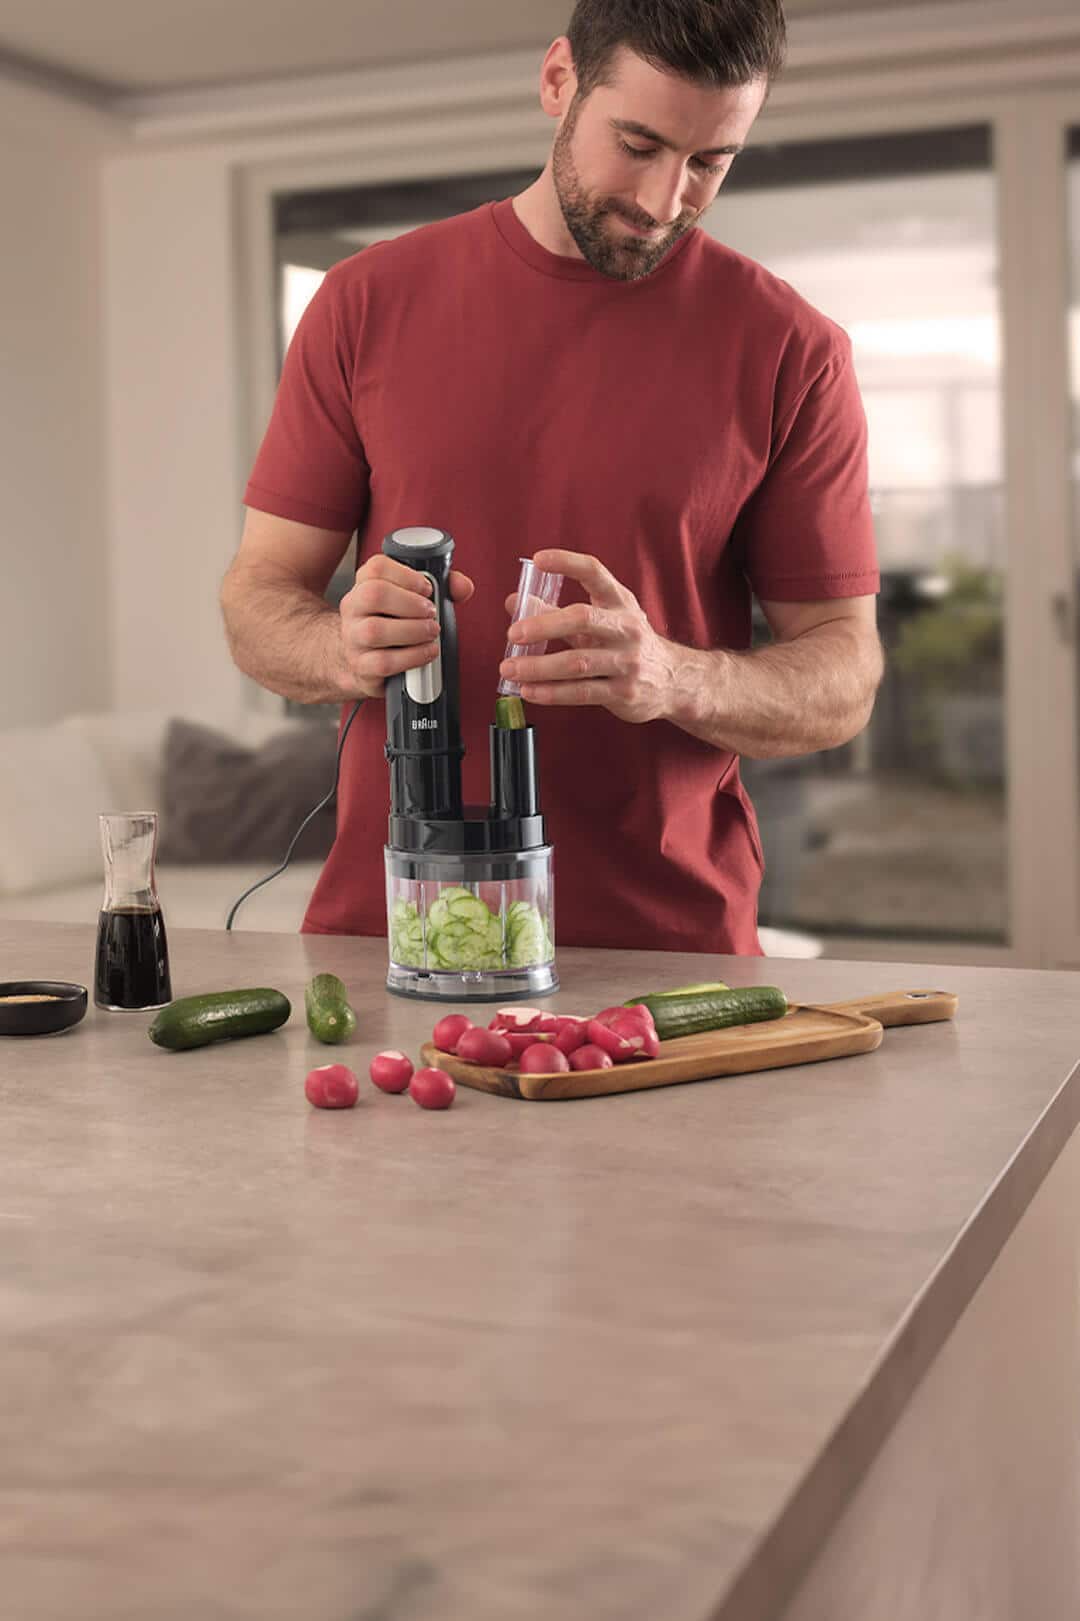 A man slices a cucumber using the Braun MQ 5 Pro Hand blender and the Mini Food Processor Attachment.